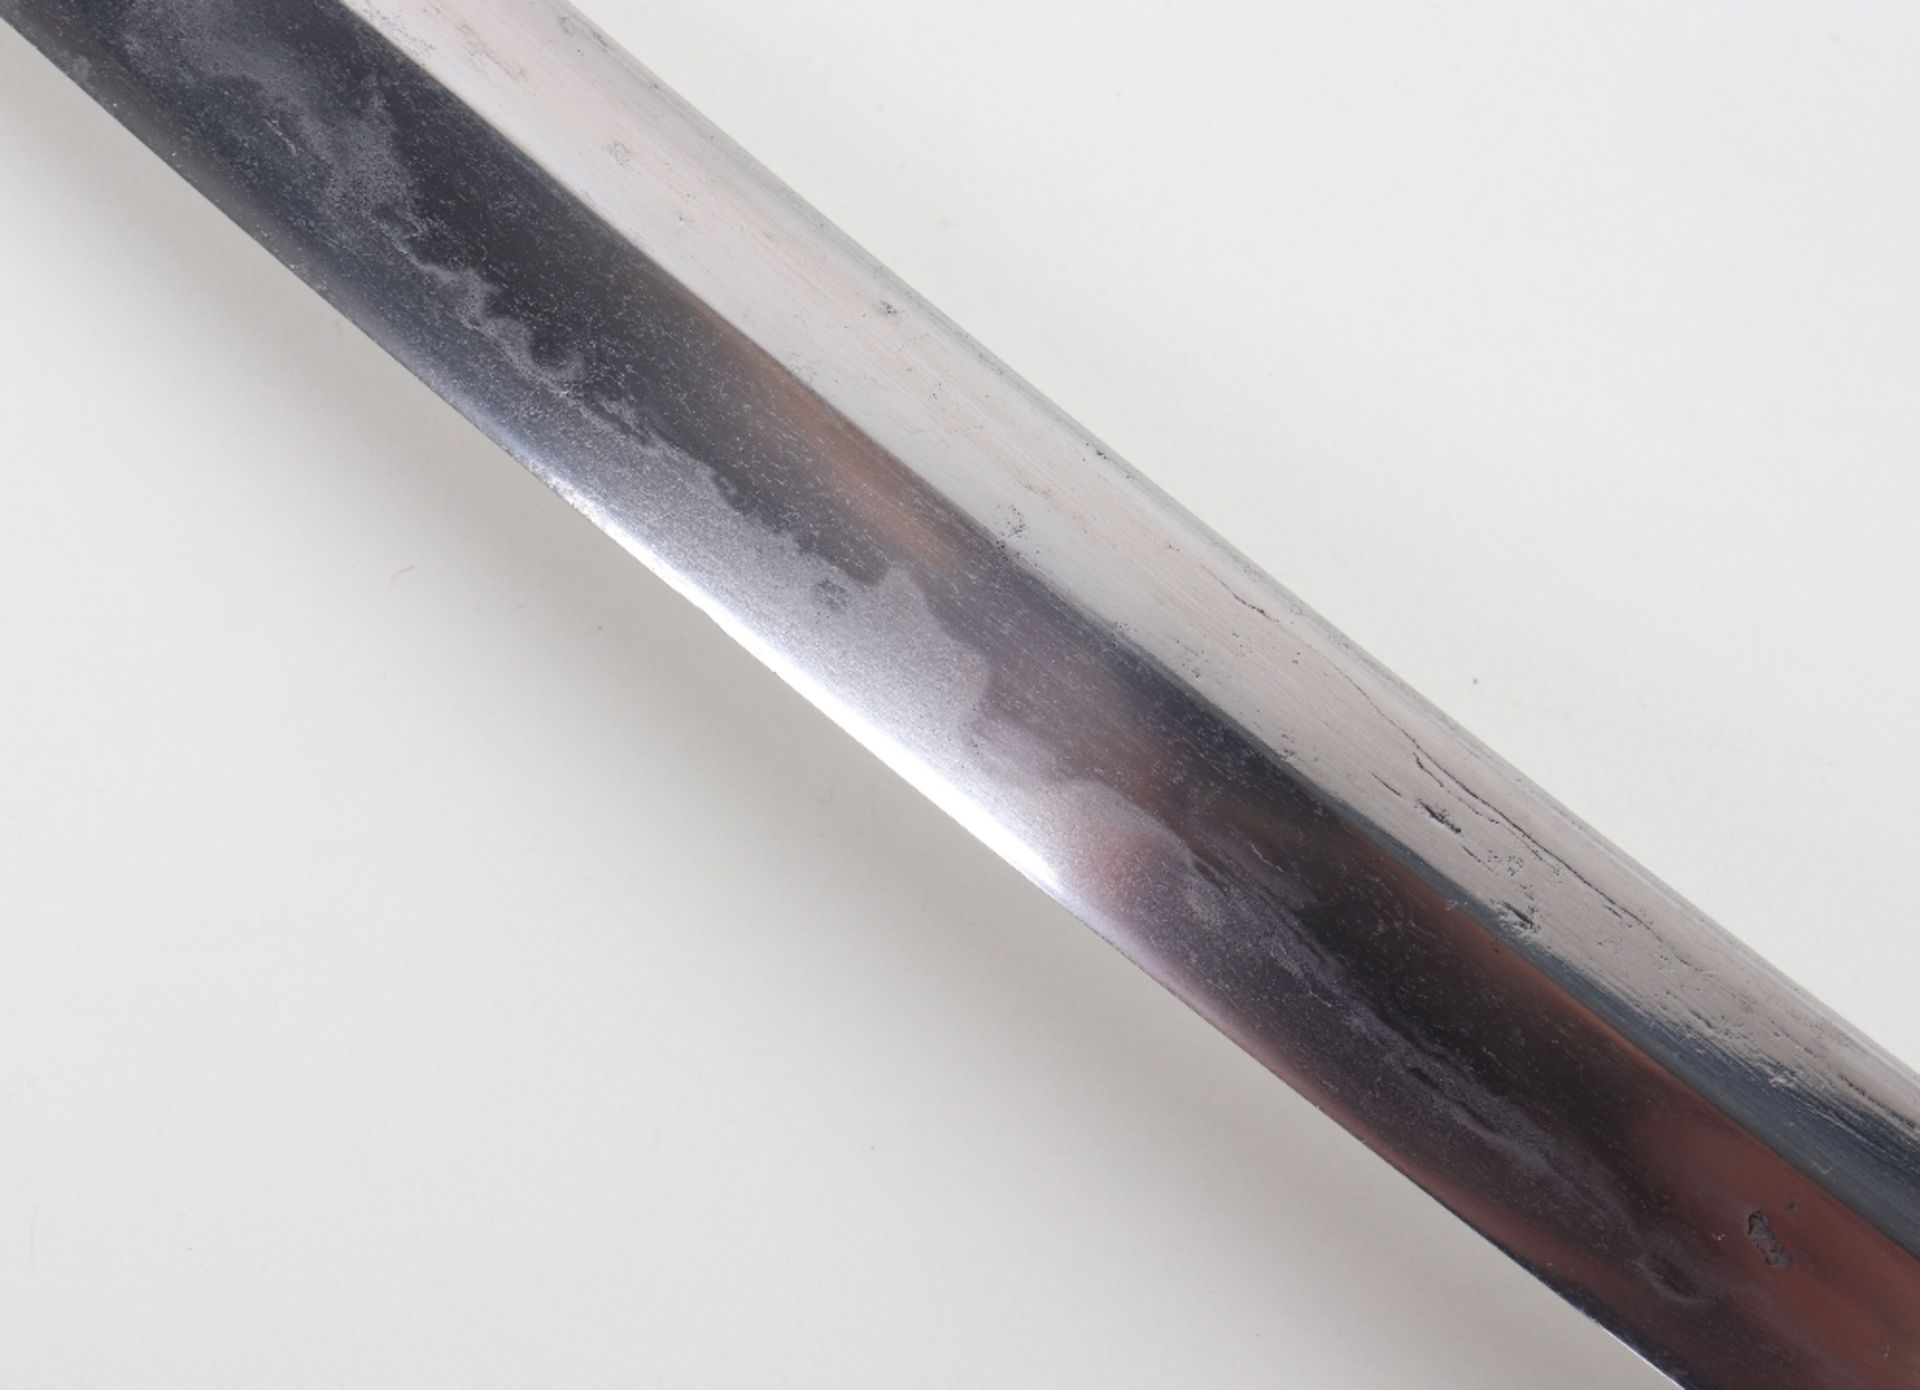 Composite Japanese Sword of Tachi Type - Image 17 of 25